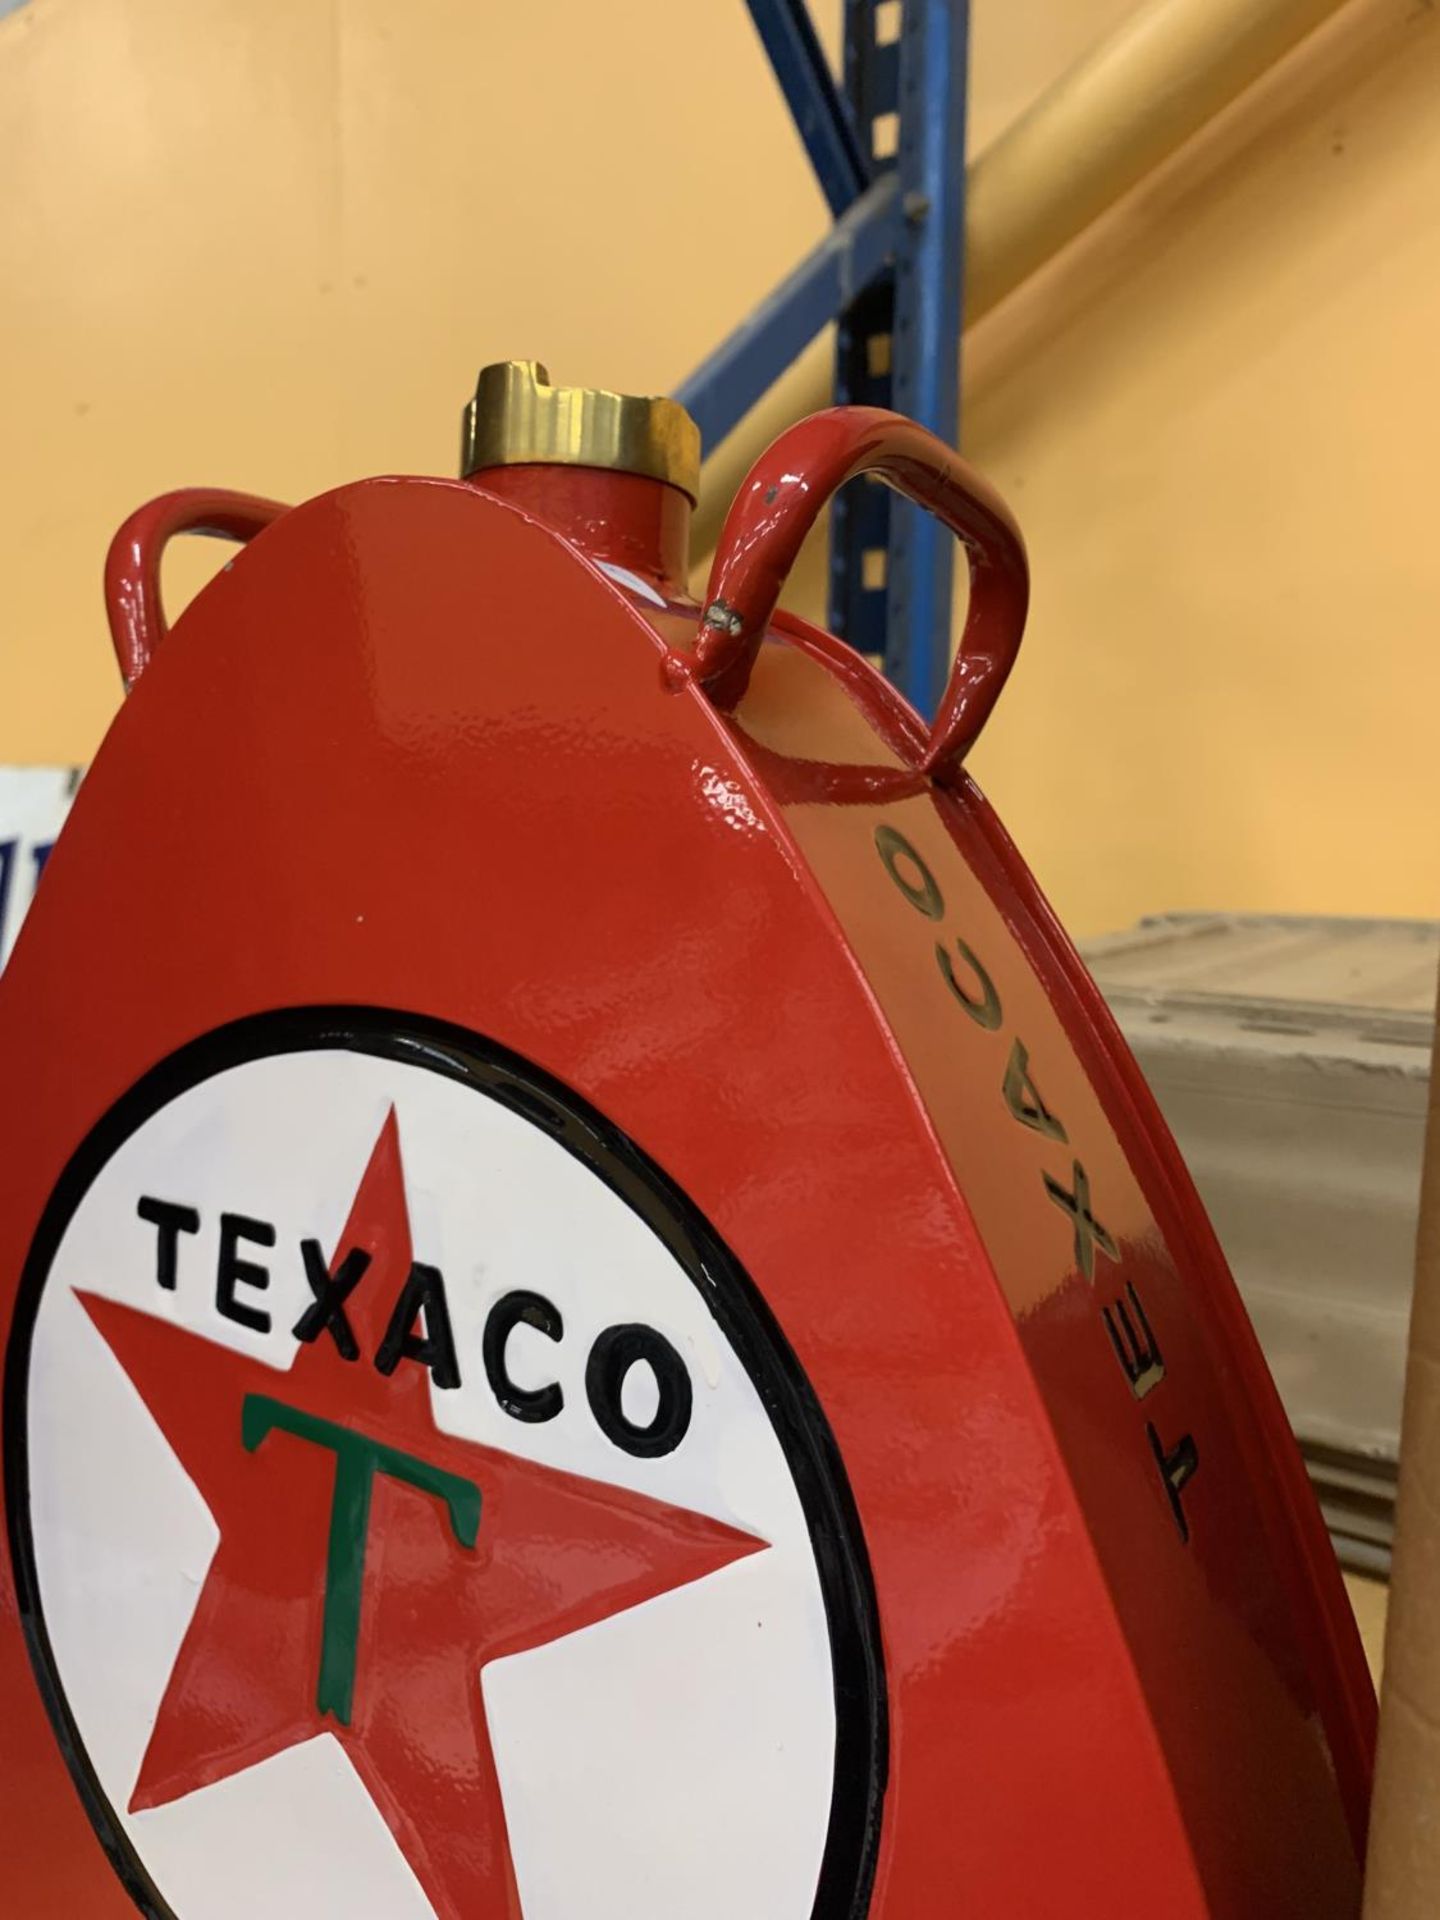 A RED TEXACO PETROL CAN - Image 2 of 2